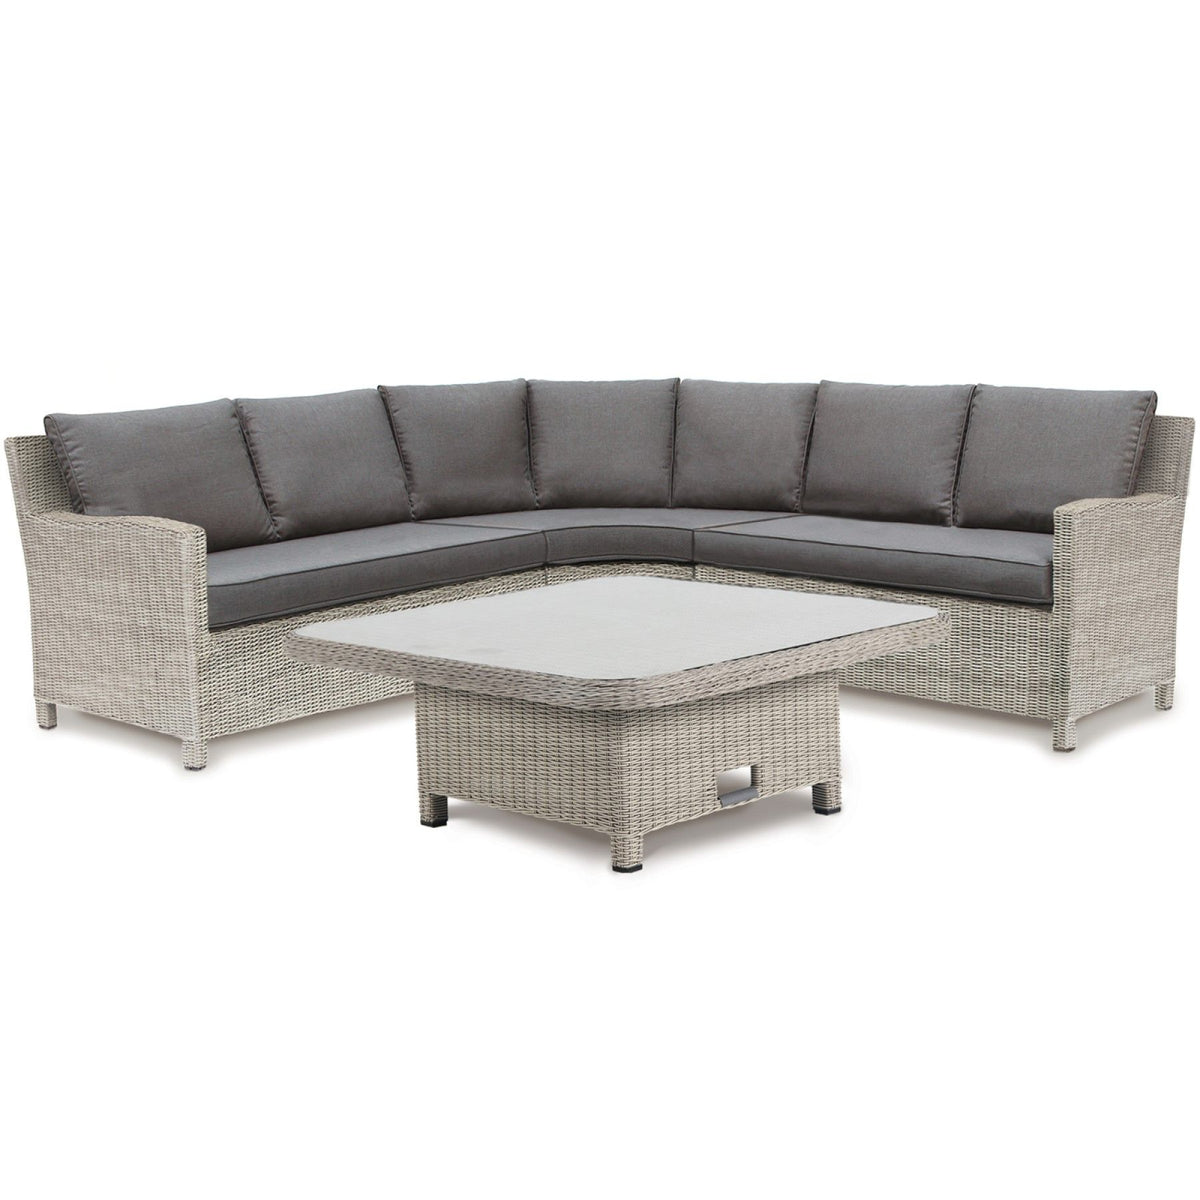 Kettler Palma Signature Grande White Wash Corner Sofa Set with High Low Glass Top Table